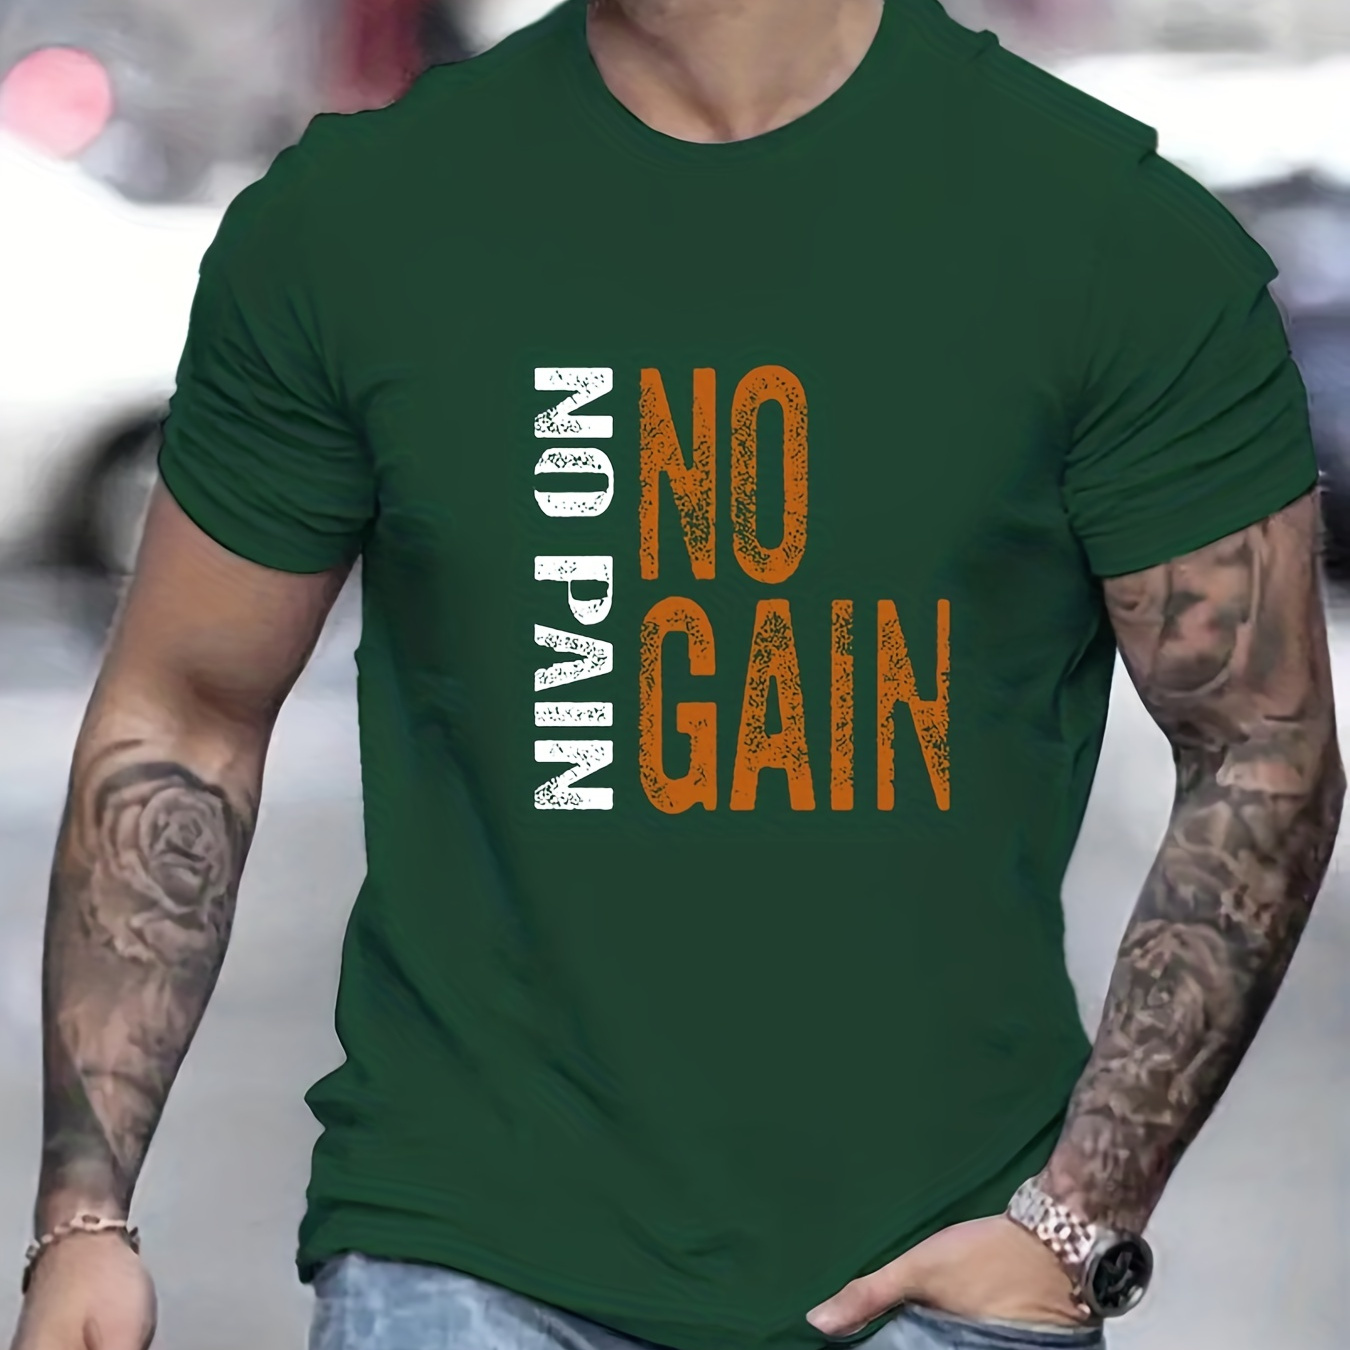 

Men's Trendy Letter Print T-shirt, Casual Comfy "no Pain No Gain" Slightly Stretch Crew Neck Loose Tee Top For Summer Outdoor